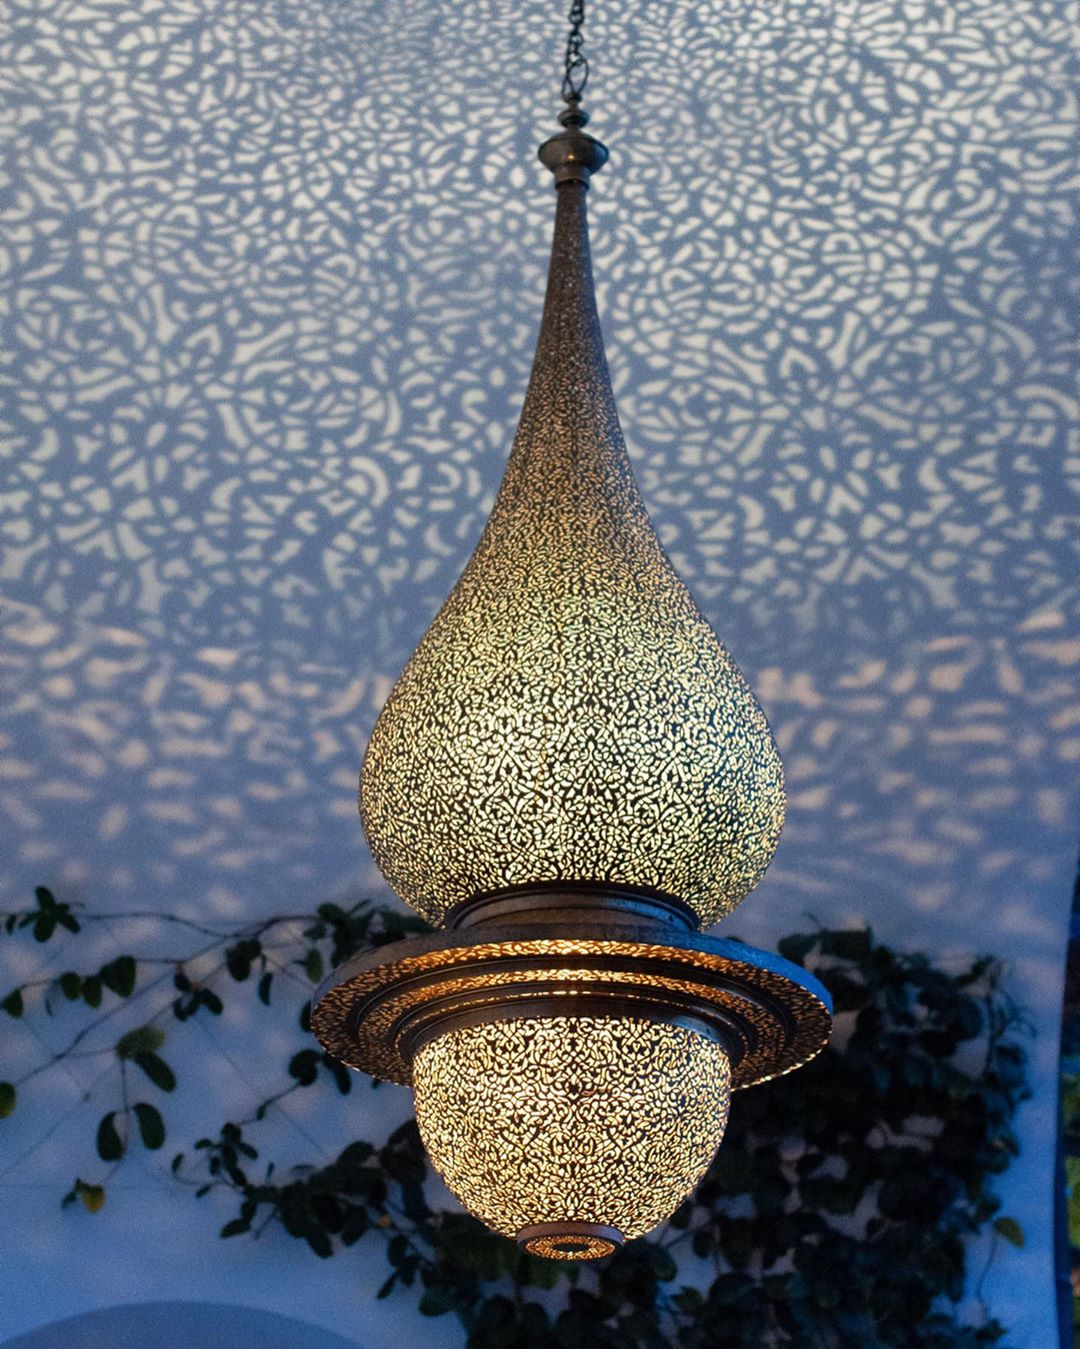 Today we're talking all about texture and design in the scope of wedding planning, and this Moroccan pendant glow is the picture perfect example of why this design element makes all the difference in the world #weddinglights #moroccaninterior #weddingdesign // Willow & Oak Events